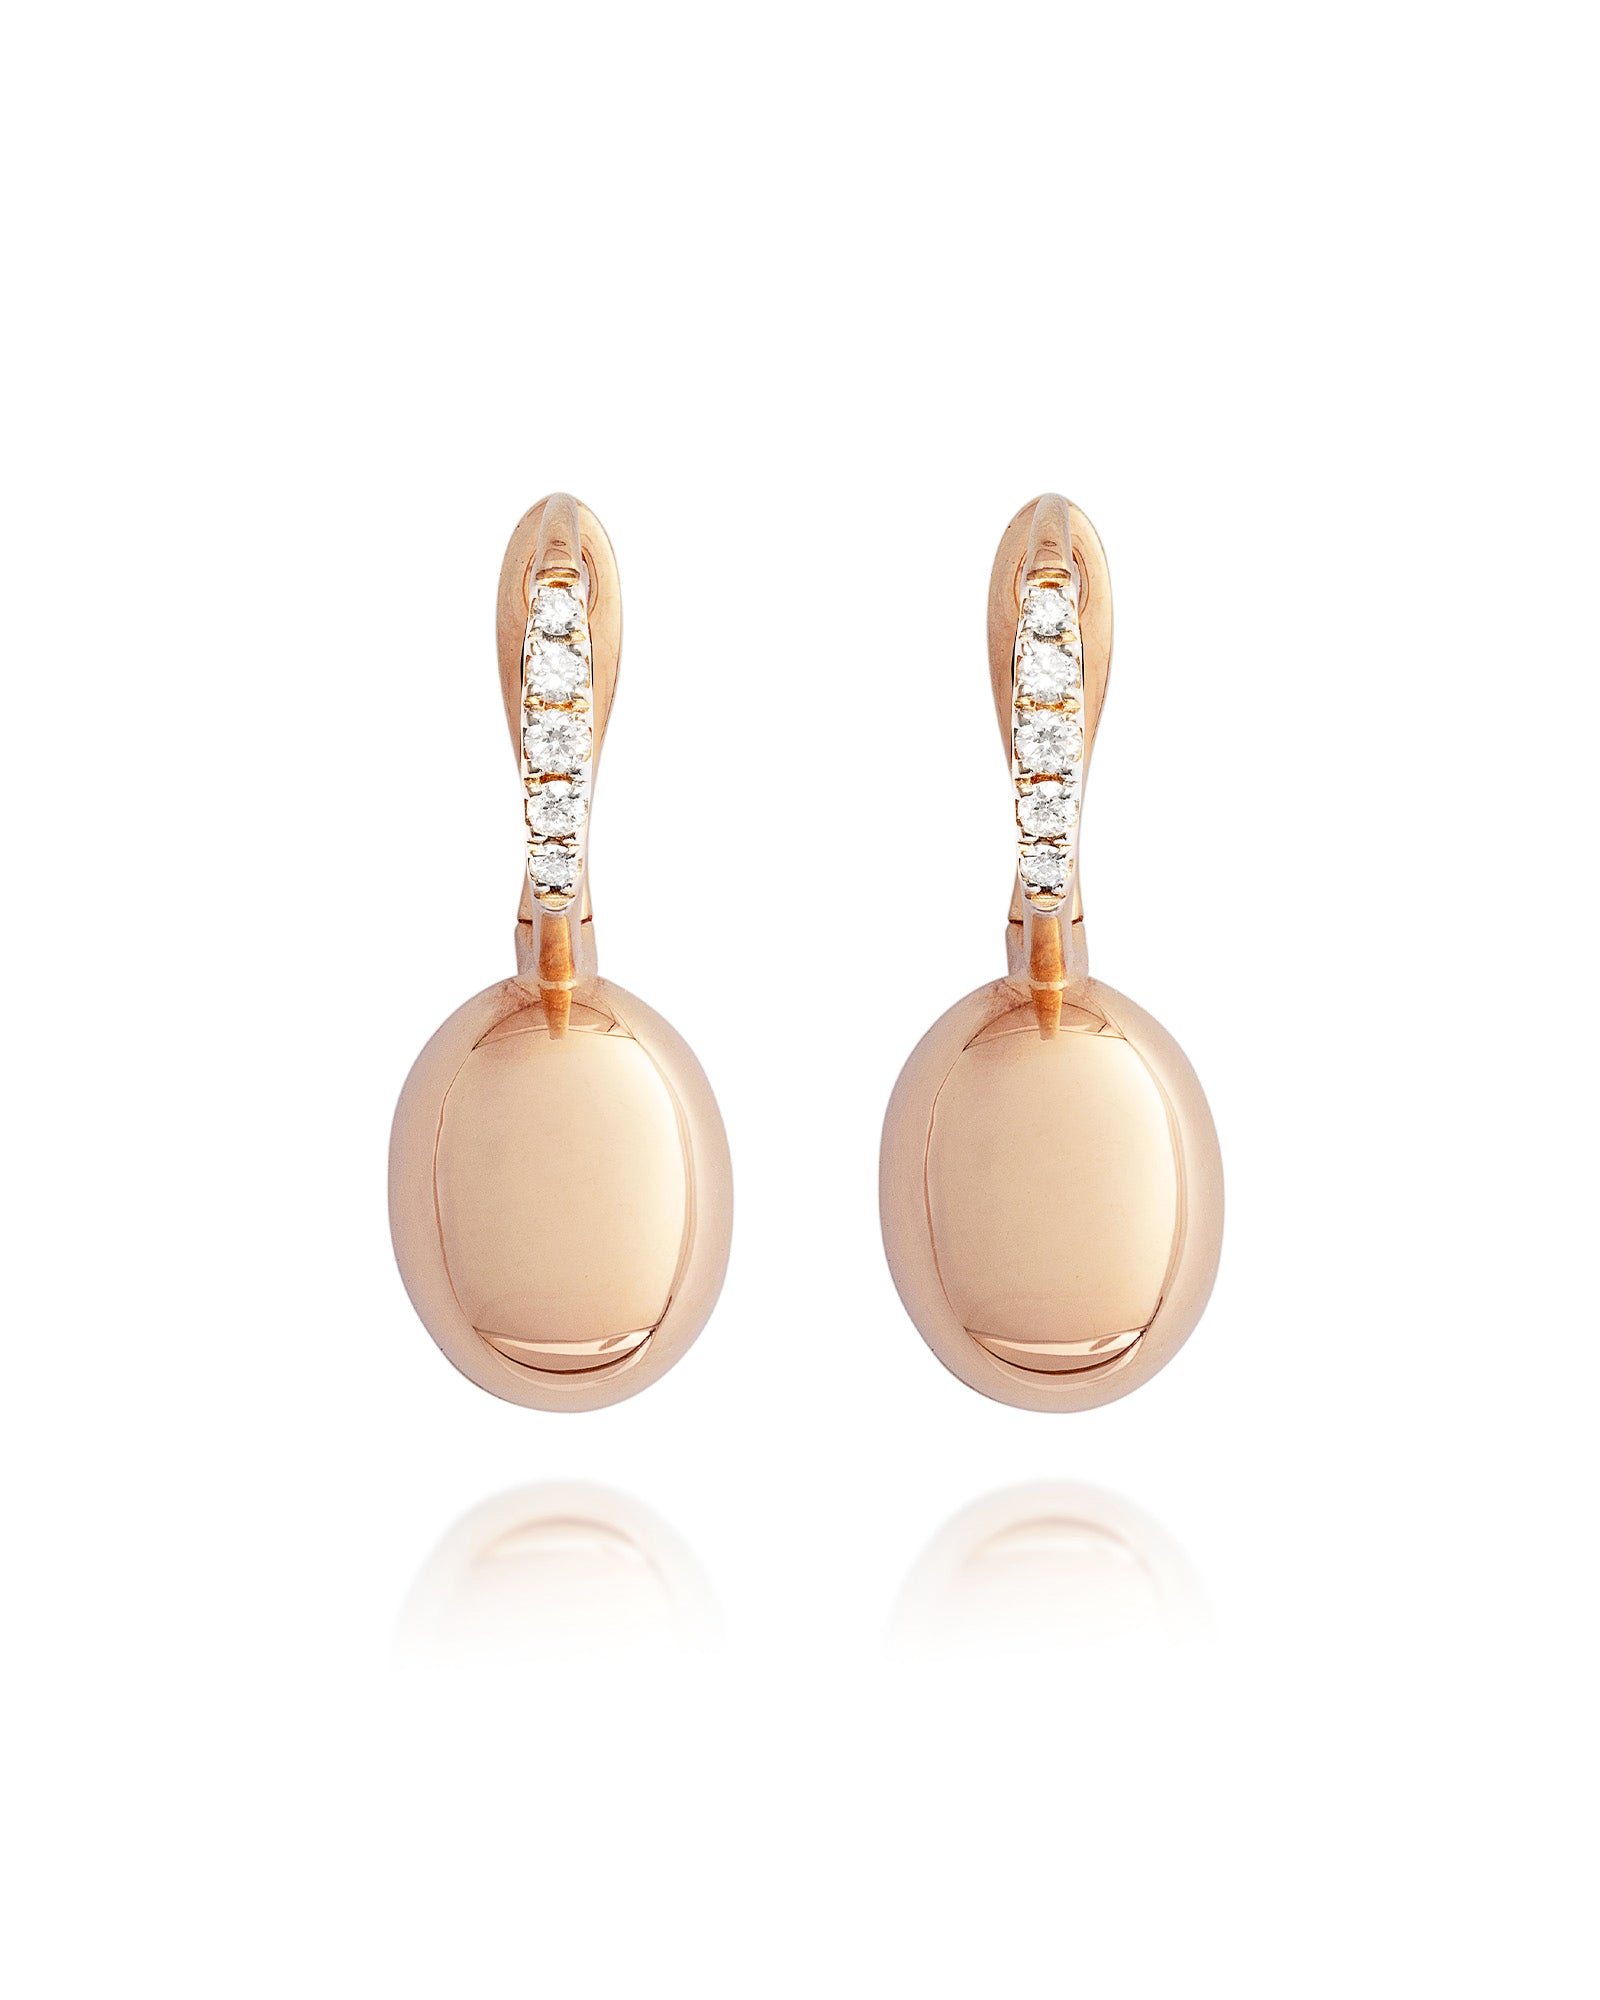 "Ciliegine" rose gold boules and diamonds details earrings (small)